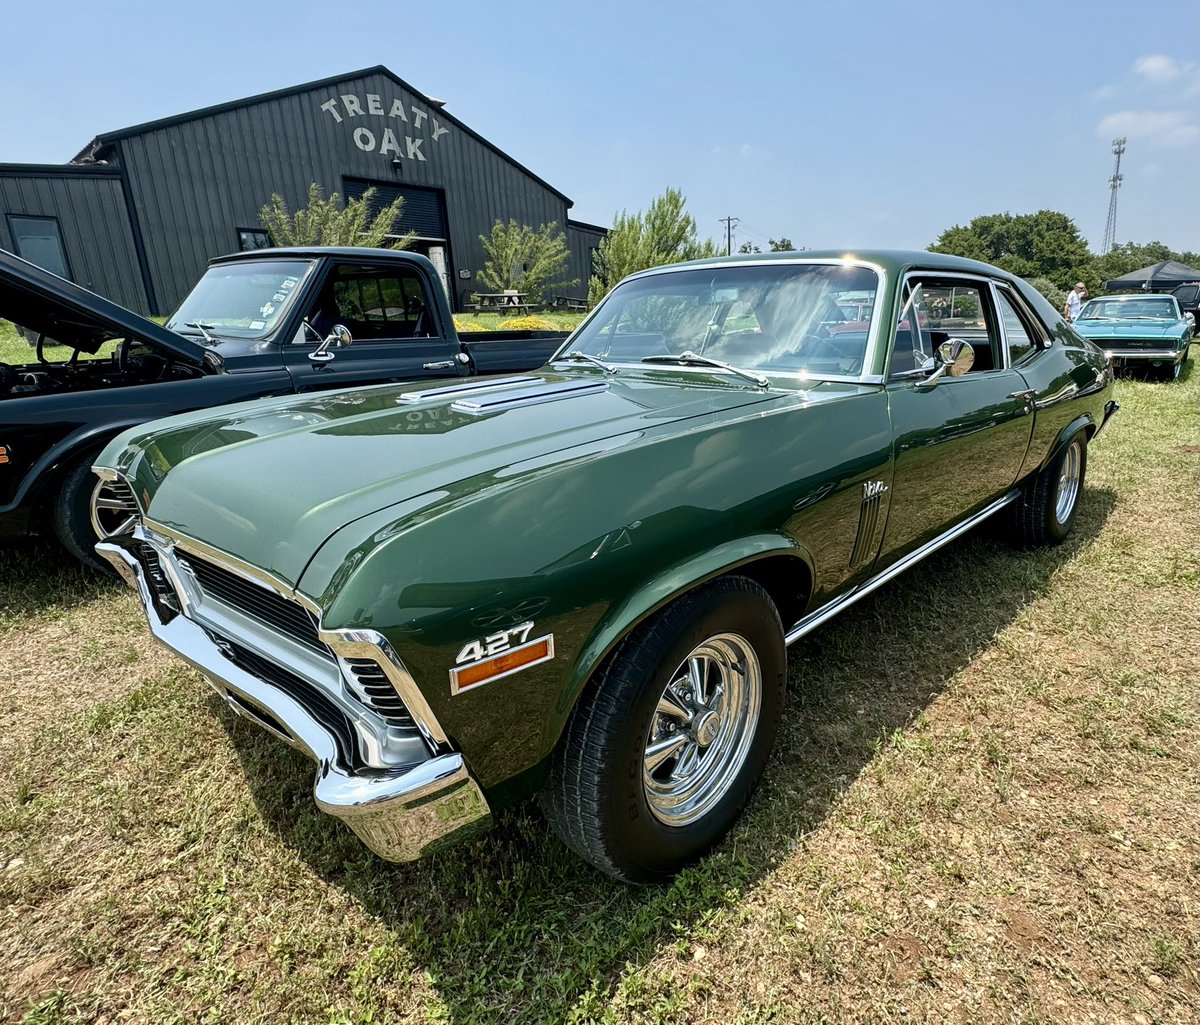 Absolute beautiful green Nova at @TreatyOakTX at the classic car show and bourbon event. When it comes to color, this one took the prize! #classiccar